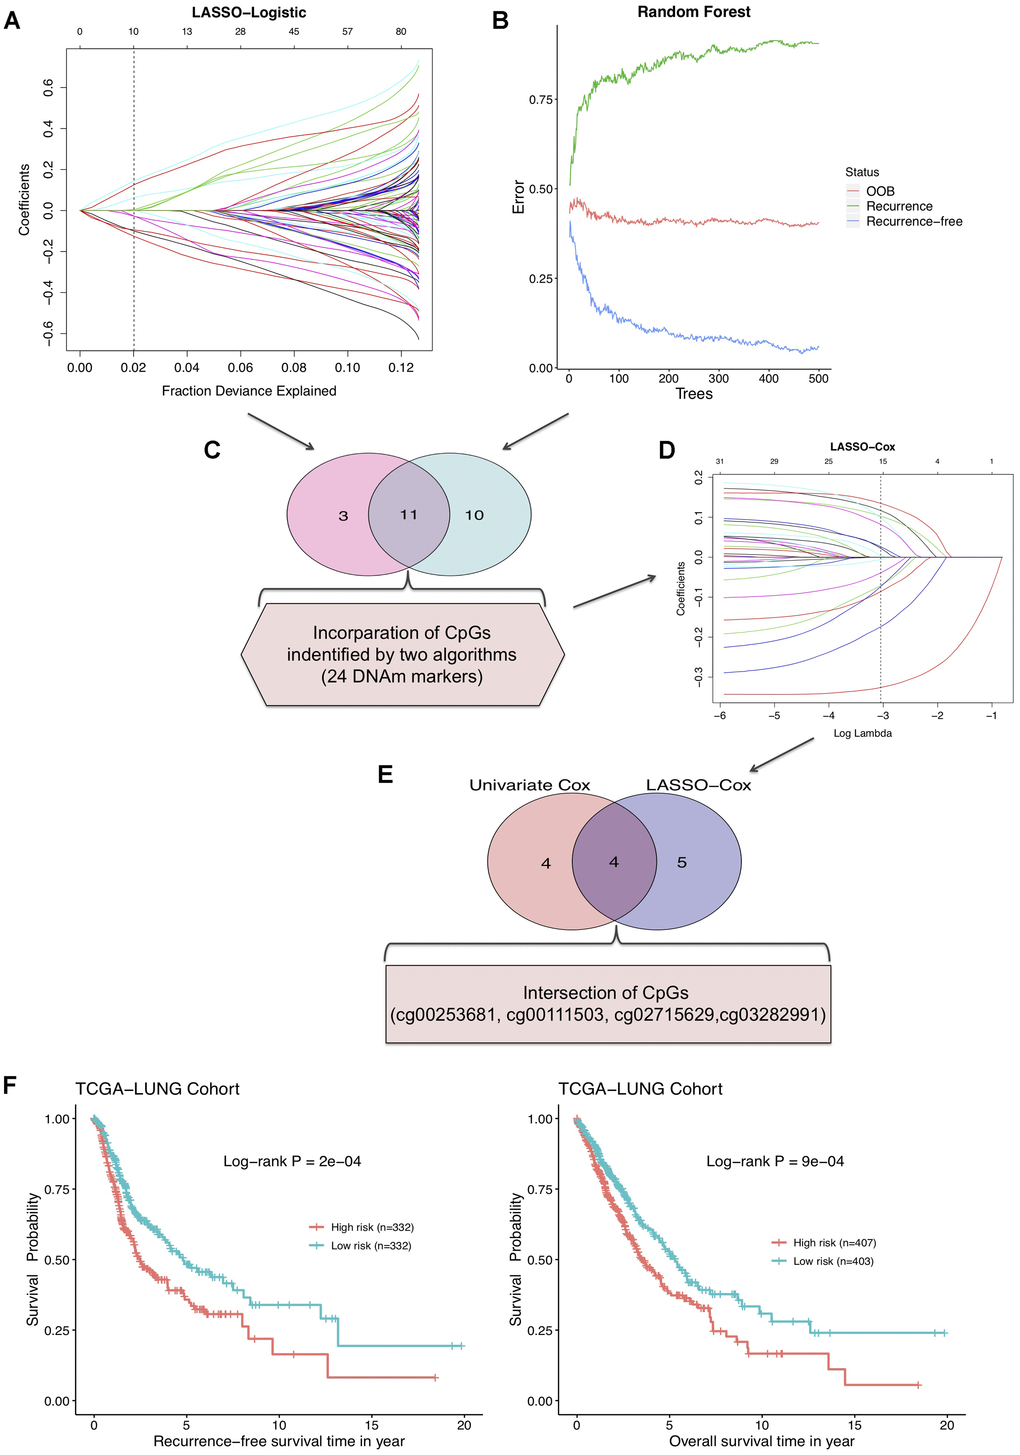 (A) LASSO-Logistic and (B) Random Forest methods applied to identify recurrence associated DNAm markers in training cohort. (C) A total of 11 overlapping CpGs and 24 combined CpGs in two algorithms. (D) LASSO-Cox analysis performed to select robust relapse predictive CpGs. (E) Four final identified CpGs in the intersection of univariate Cox and LASSO-Cox results. (F) The RFS curve (left) and overall survival curve (right) of training cohort based on 4-DNAm-maker panel.